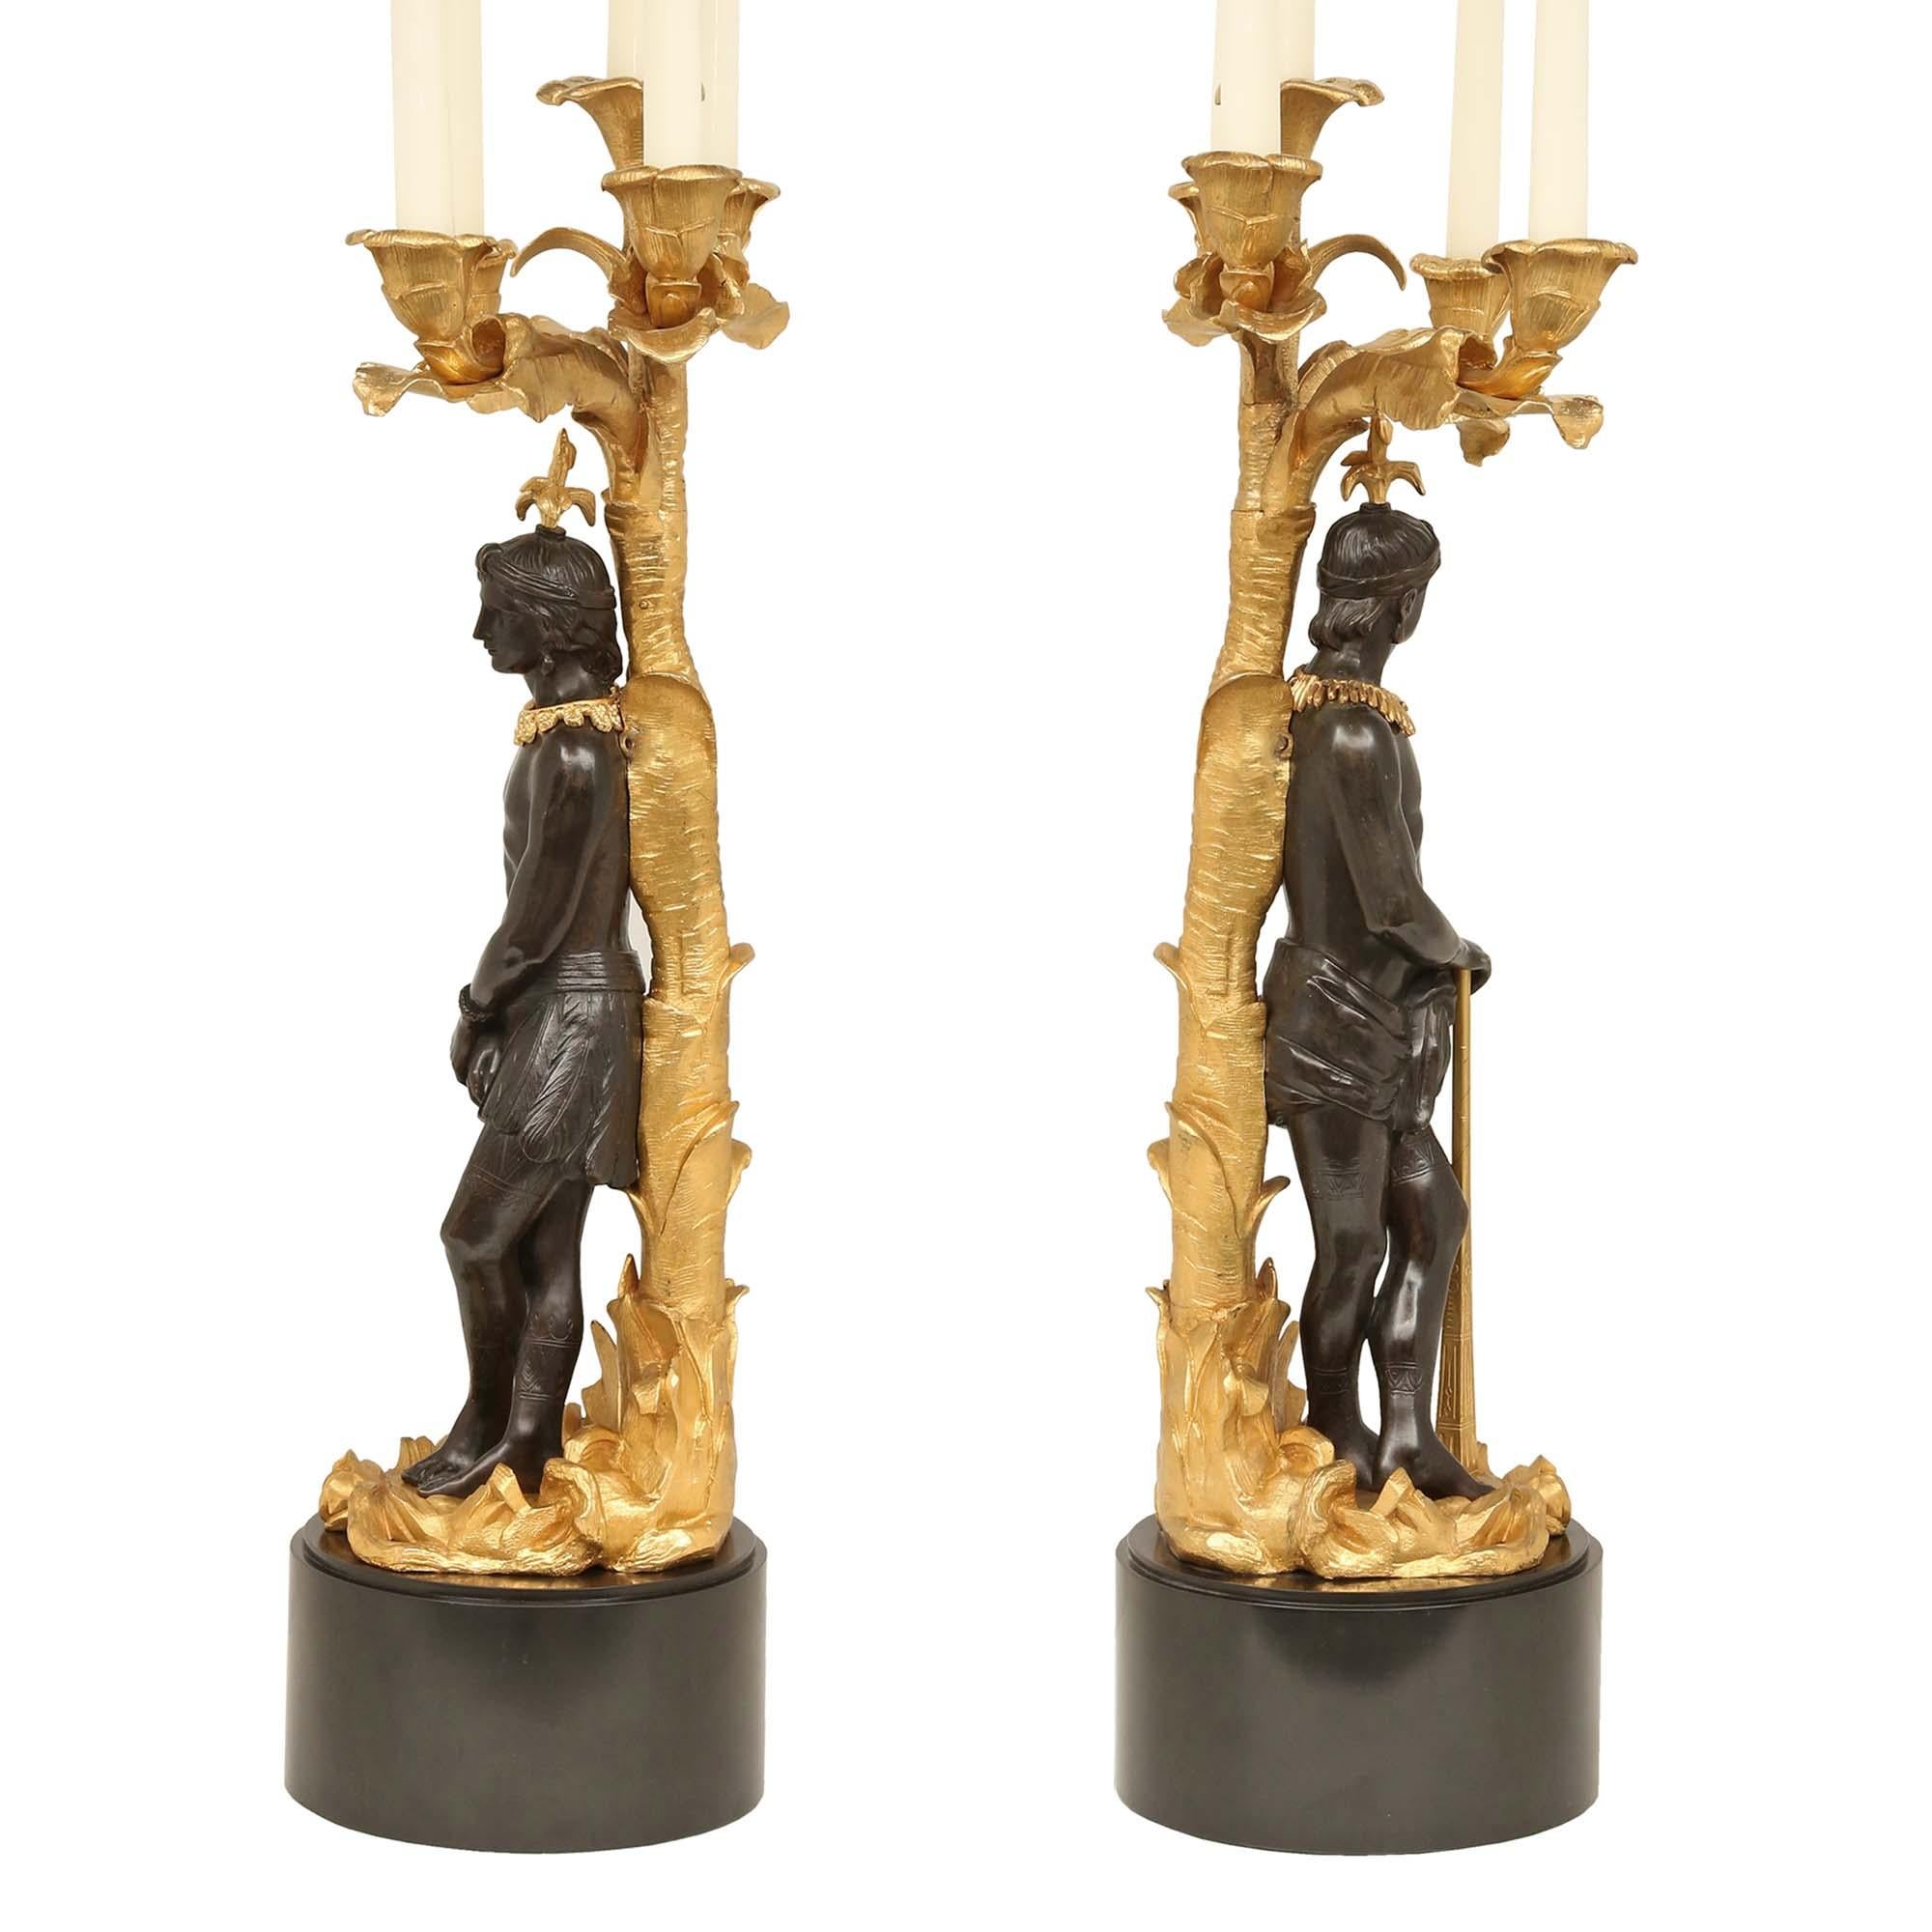 A wonderful and true pair of French 19th century Neo-Classical st. patinated bronze, ormolu and marble five arm candelabras. Each candelabra is raised by a thick, circular Black Belgian marble base with a mottled border. Above each are richly